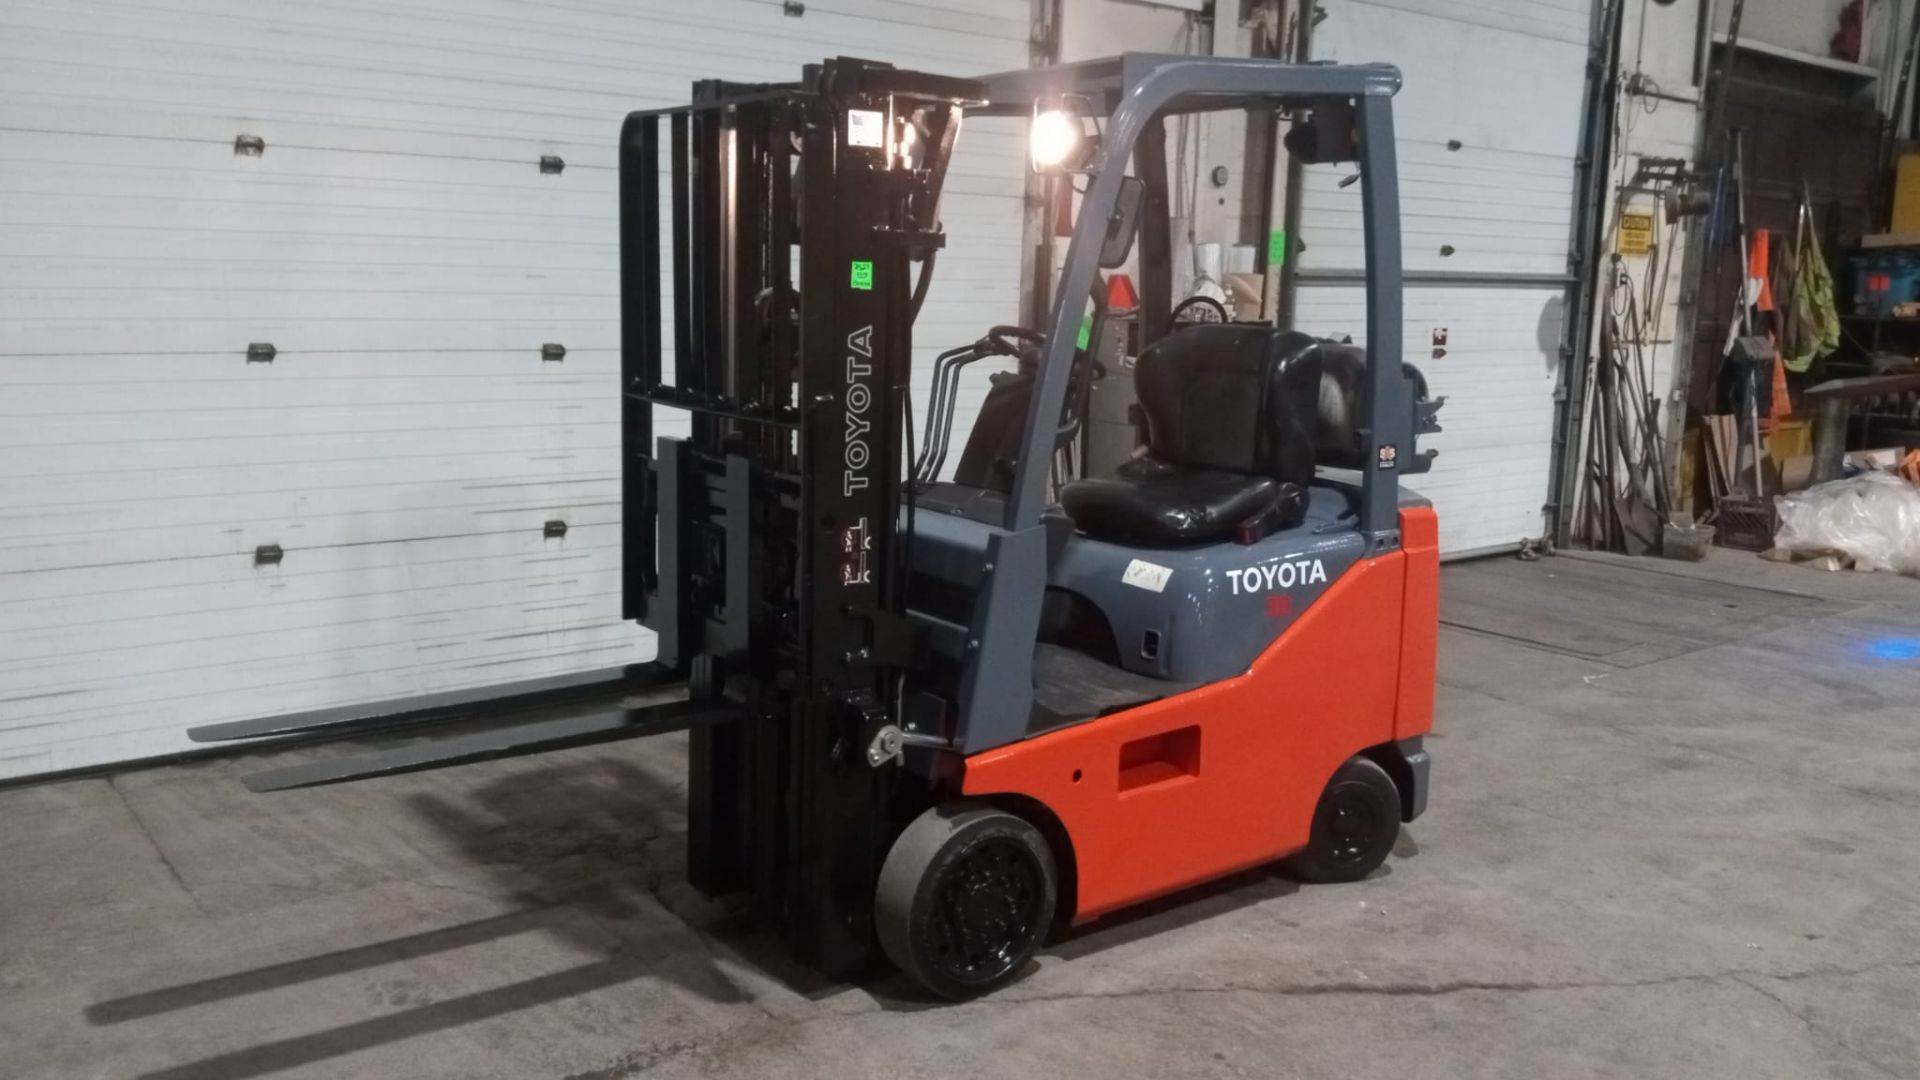 2018 TOYOTA 3,000lbs Capacity LPG (Propane) Forklift with sideshift and 3-STAGE MAST (no propane - Image 3 of 6